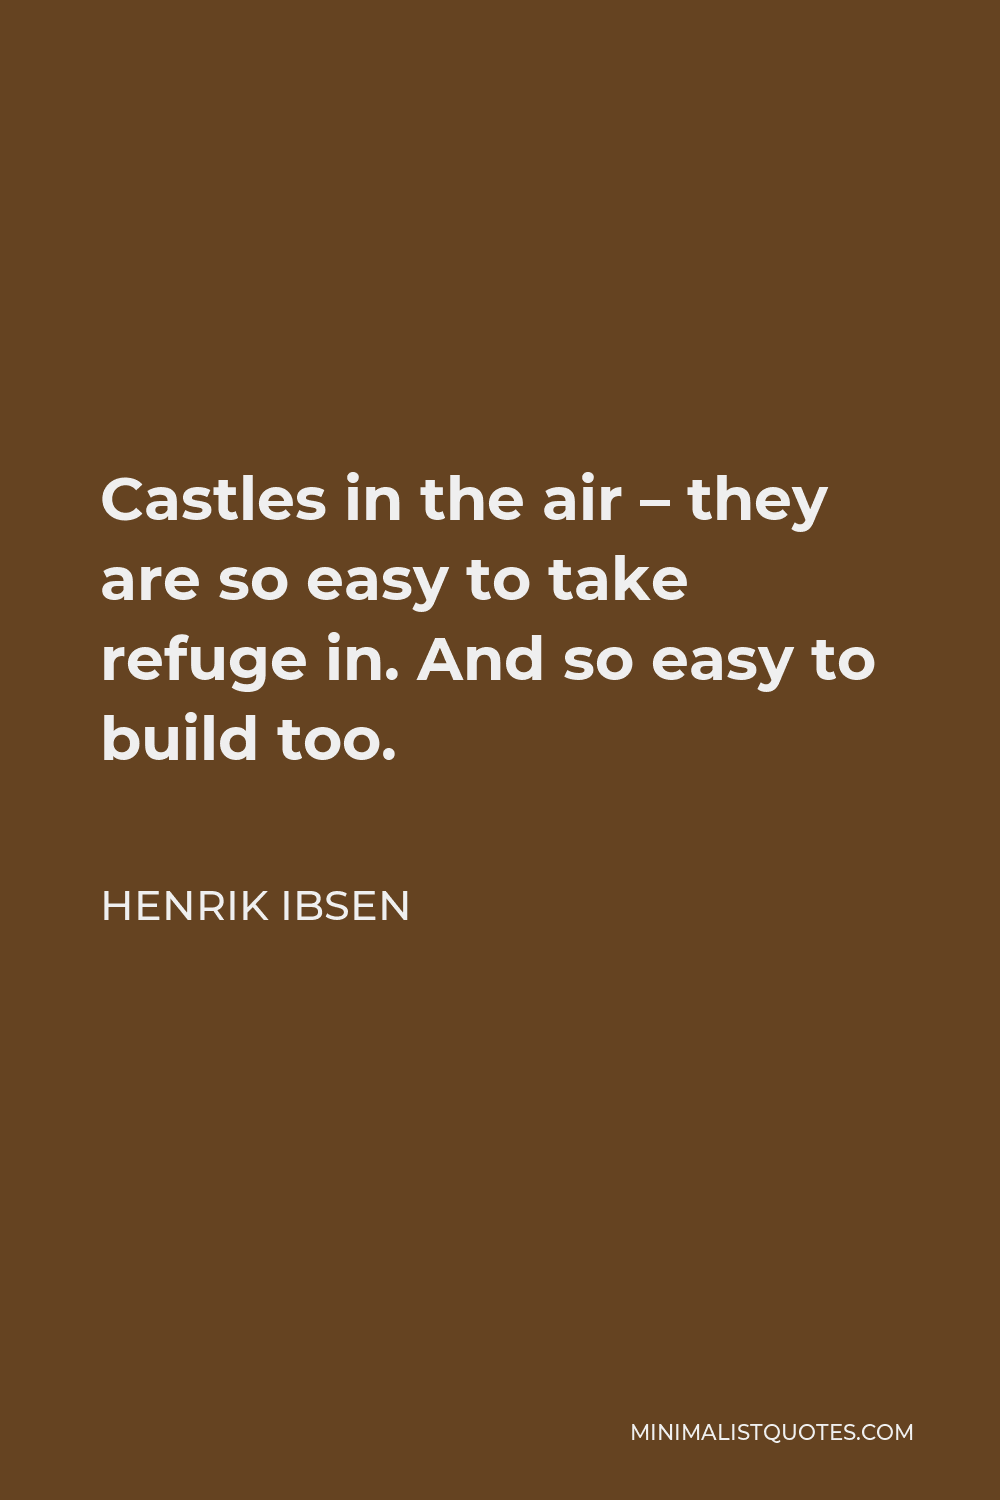 Henrik Ibsen Quote - Castles in the air – they are so easy to take refuge in. And so easy to build too.